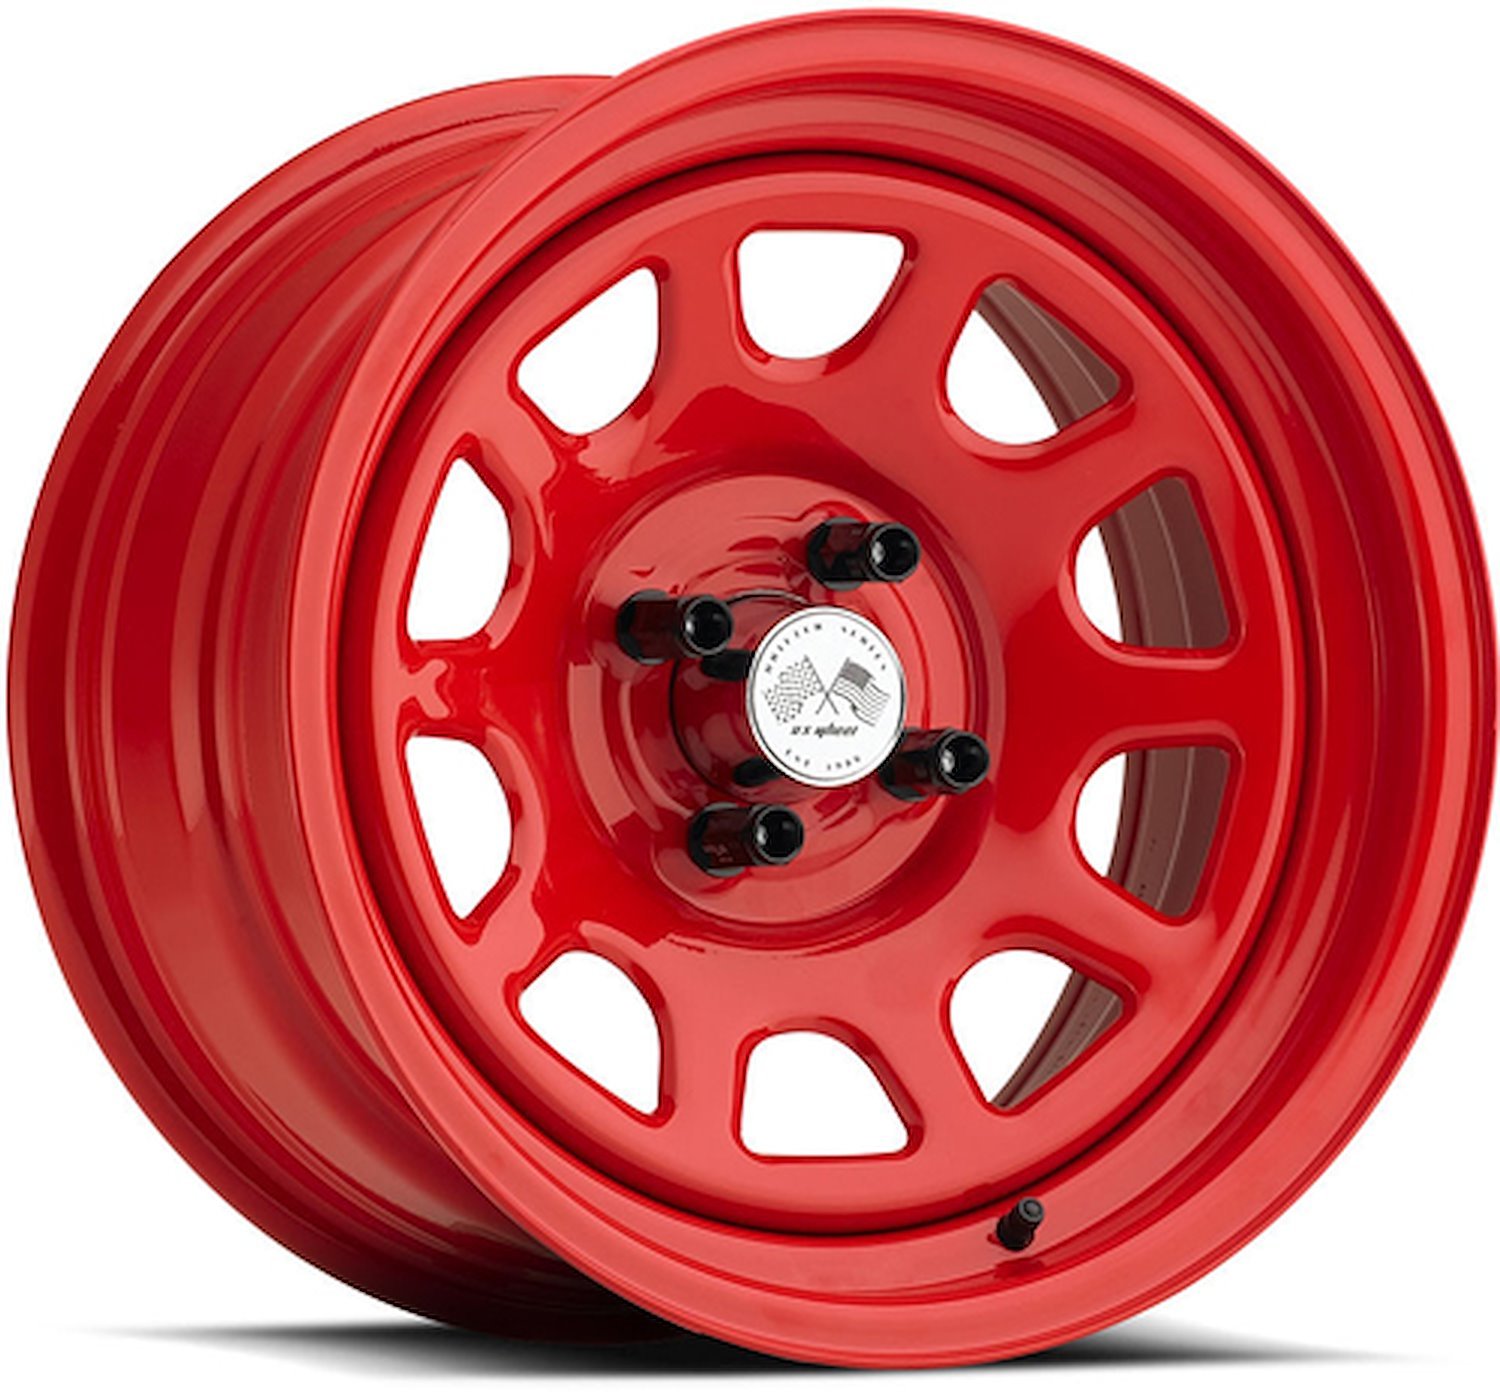 PAINTED DAYTONA FWD DRIFTER RED 15 x 8 4 x 45 Bolt Circle 45 Back Spacing 0 offset 266 Center Bore 1400 lbs Load Rating